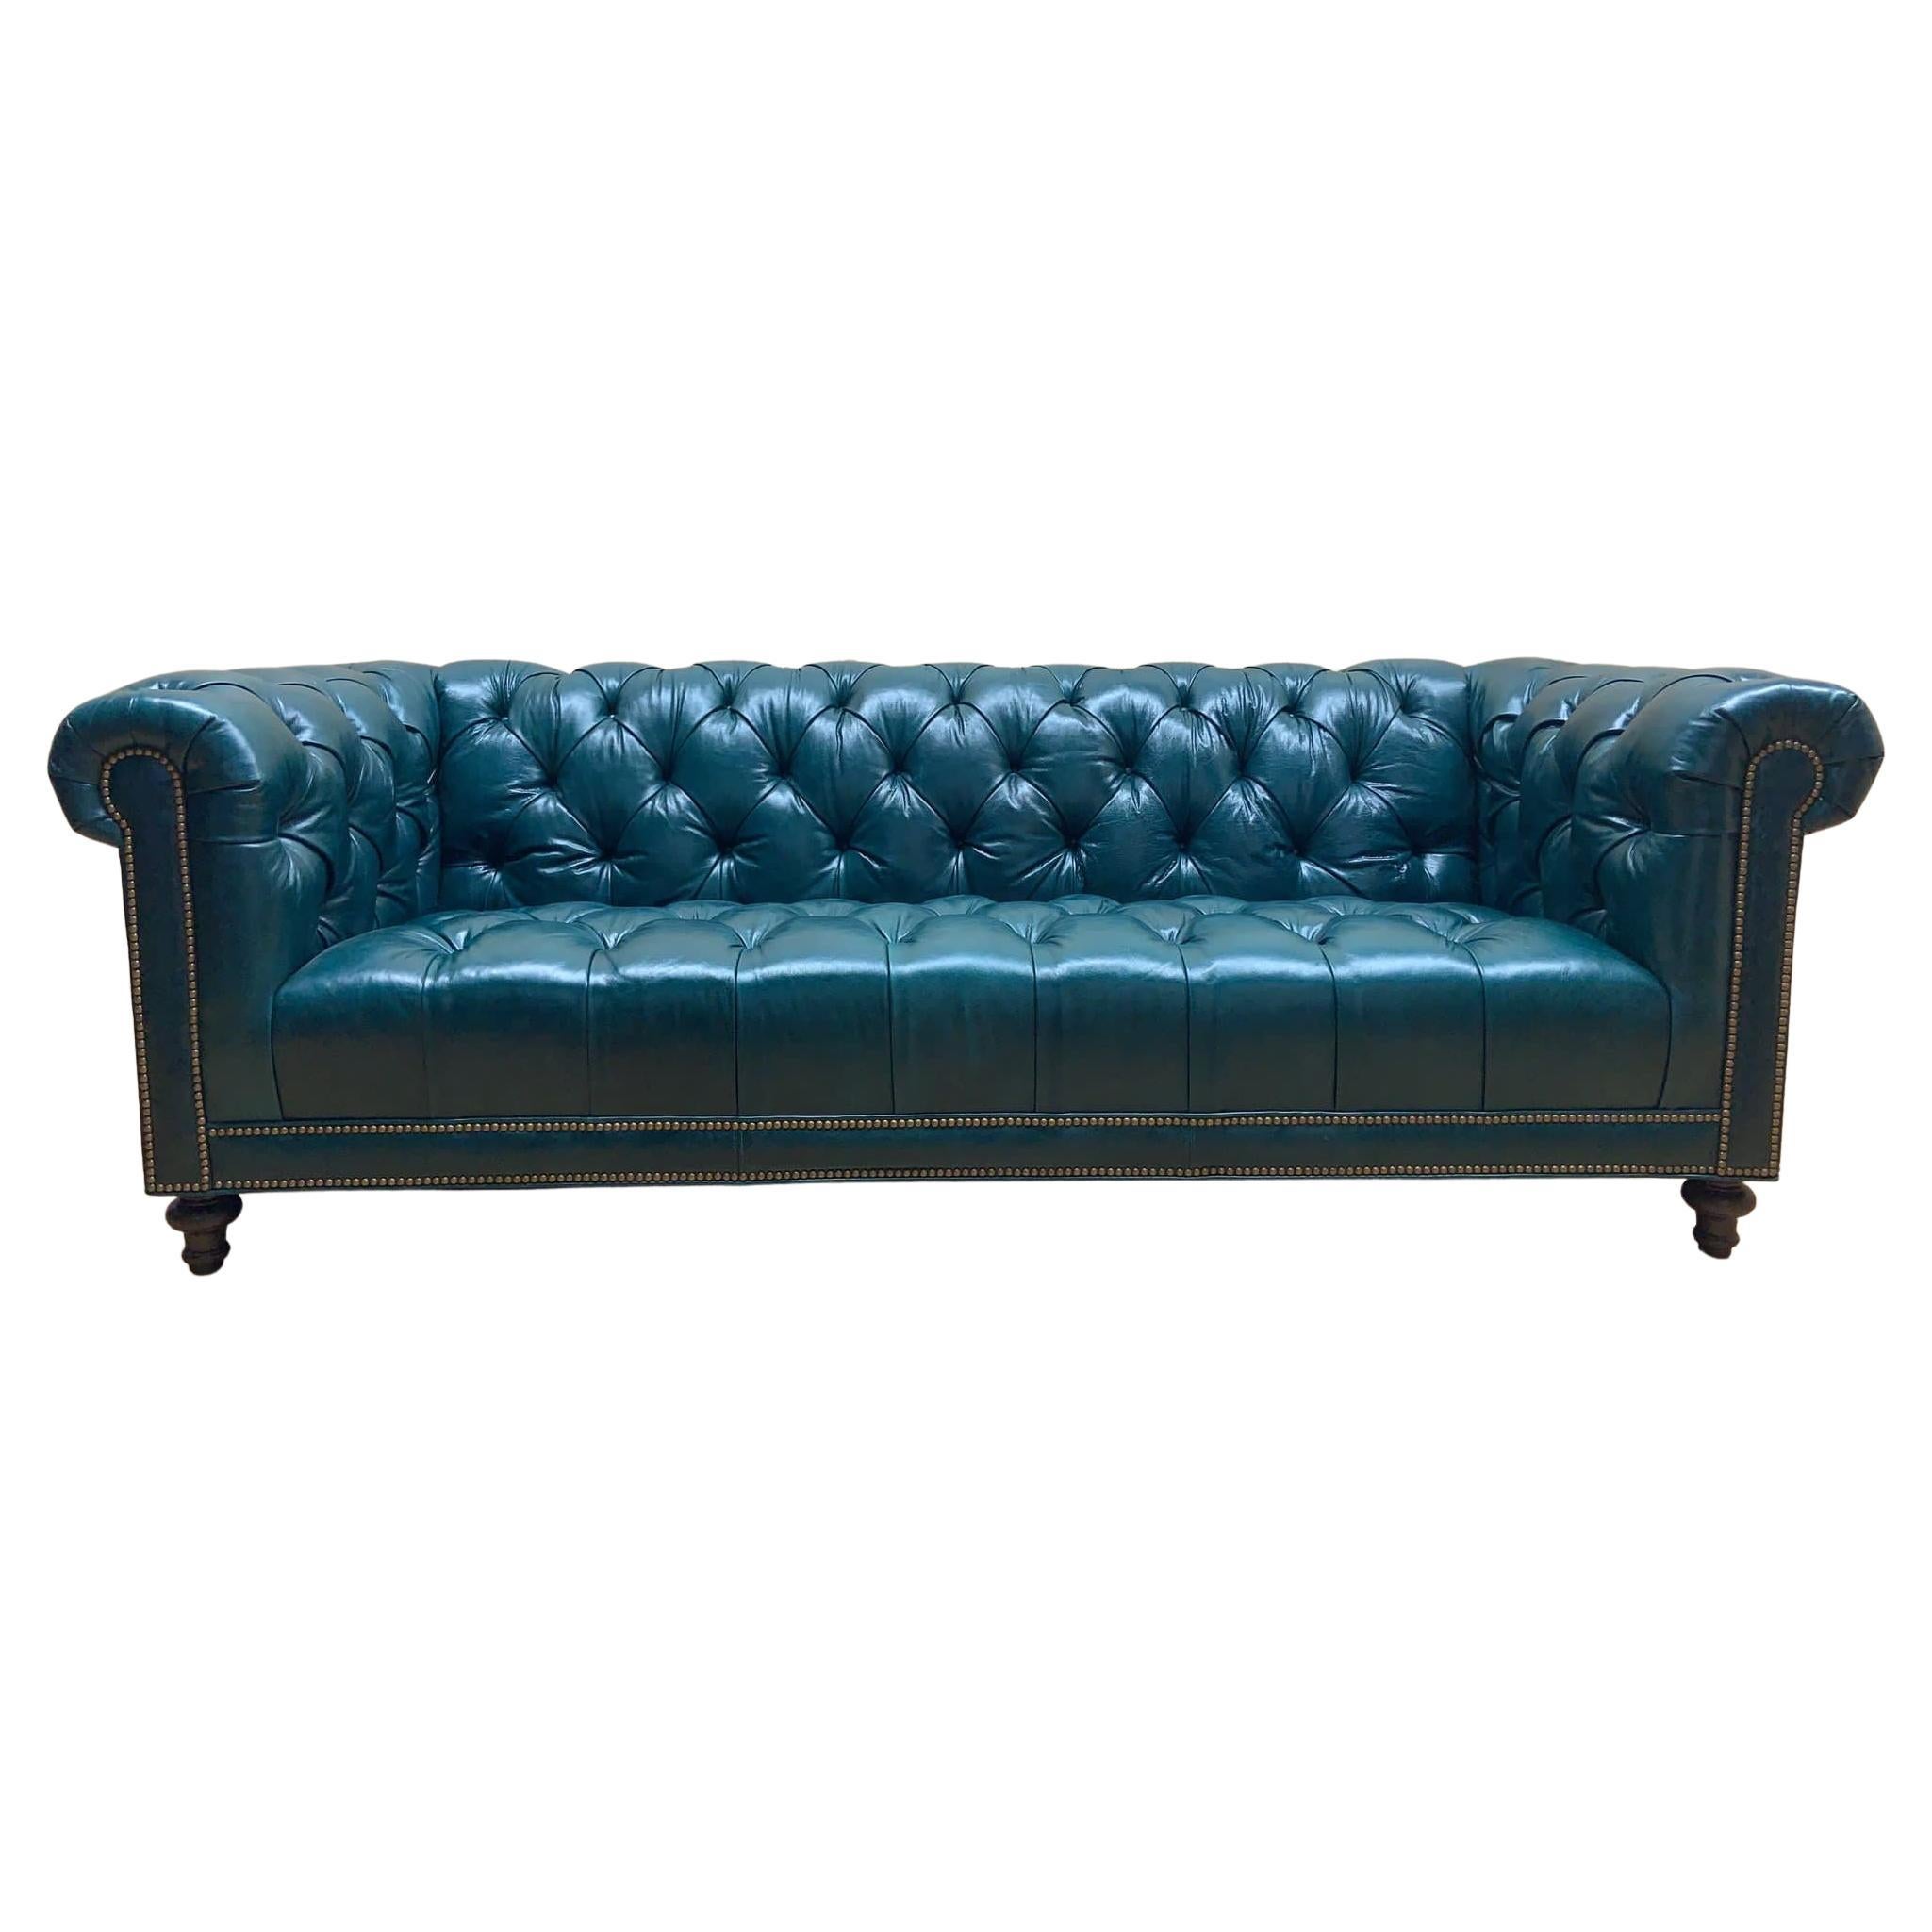 Davidson 94" Tufted Chesterfield Sofa in Turquoise Blue 